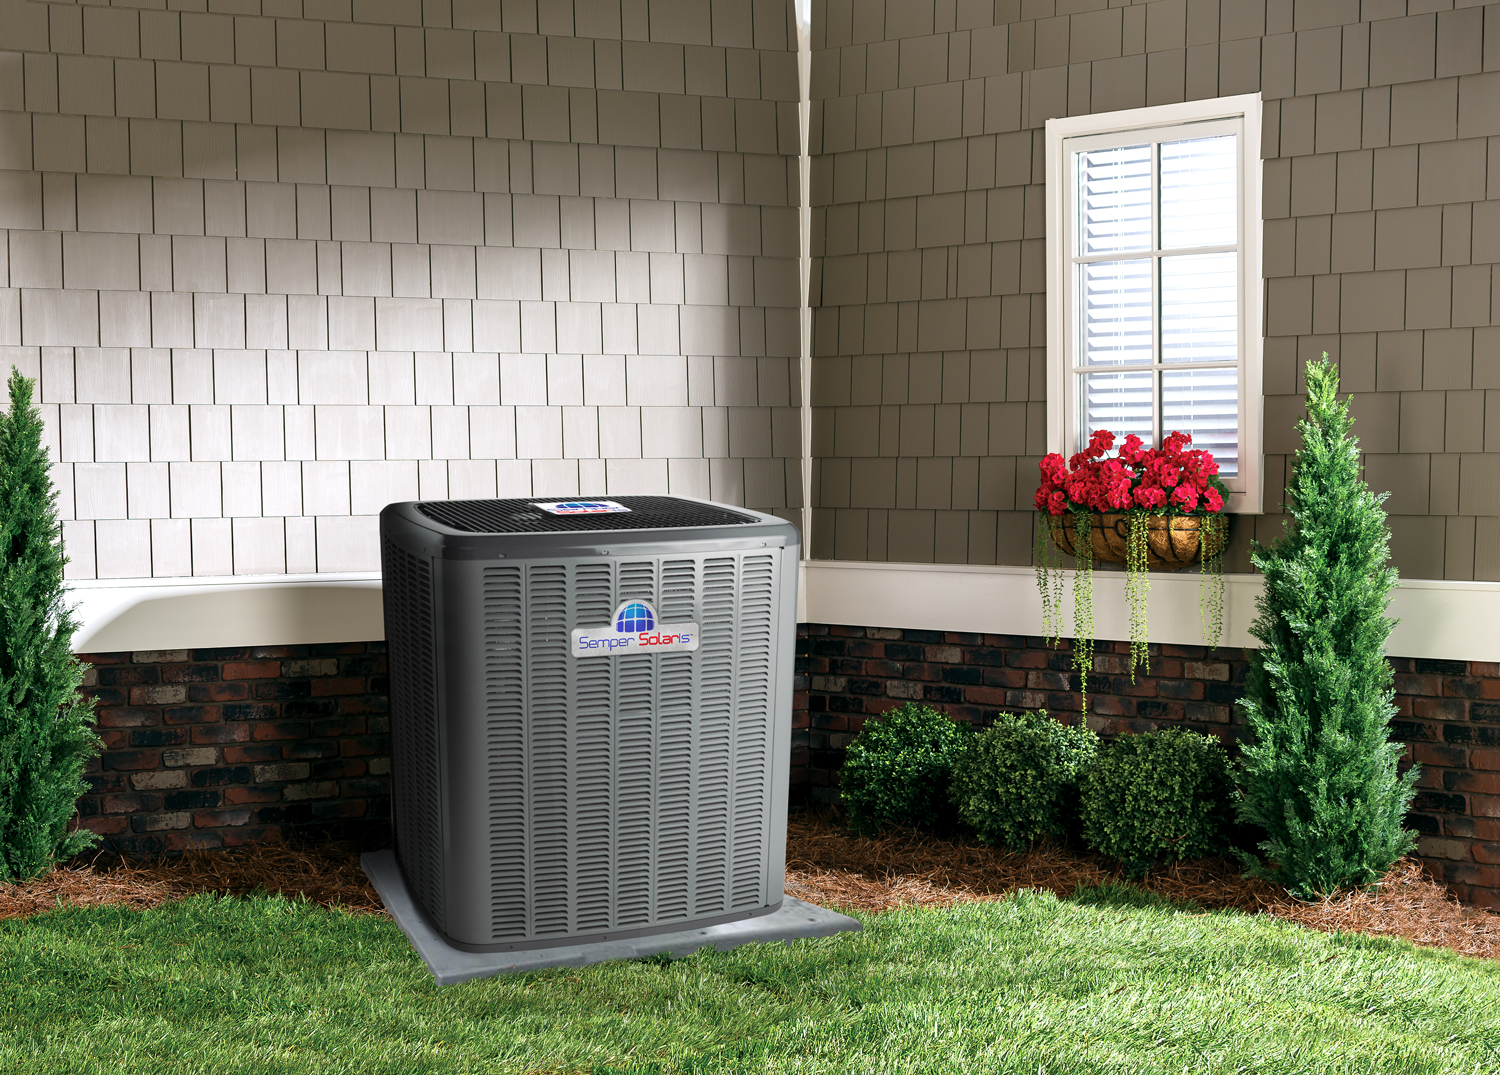 How long does it take to replace a furnace and air conditioner?